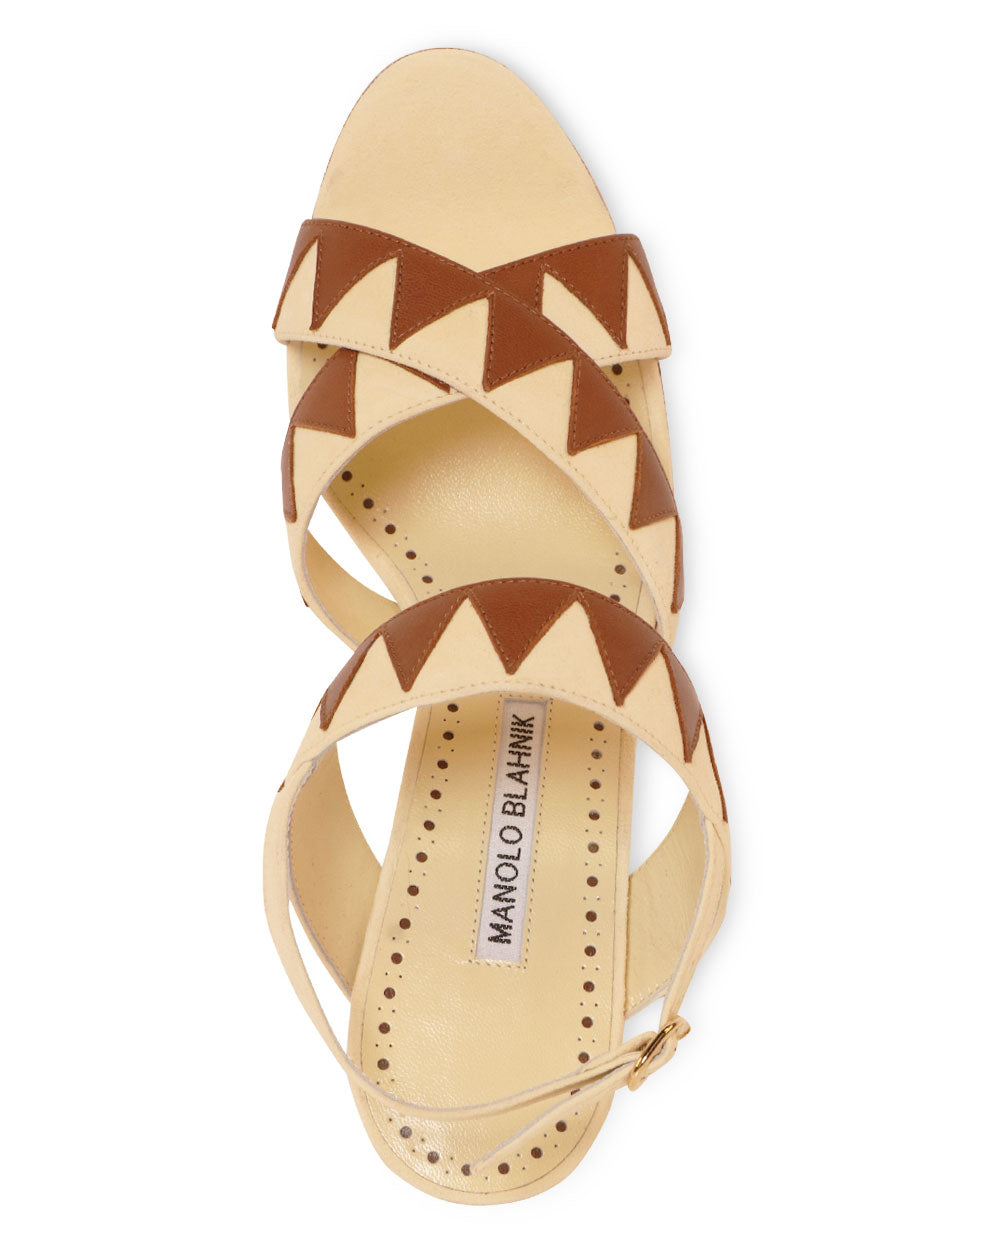 Capuci Sandal in Cream and Brown